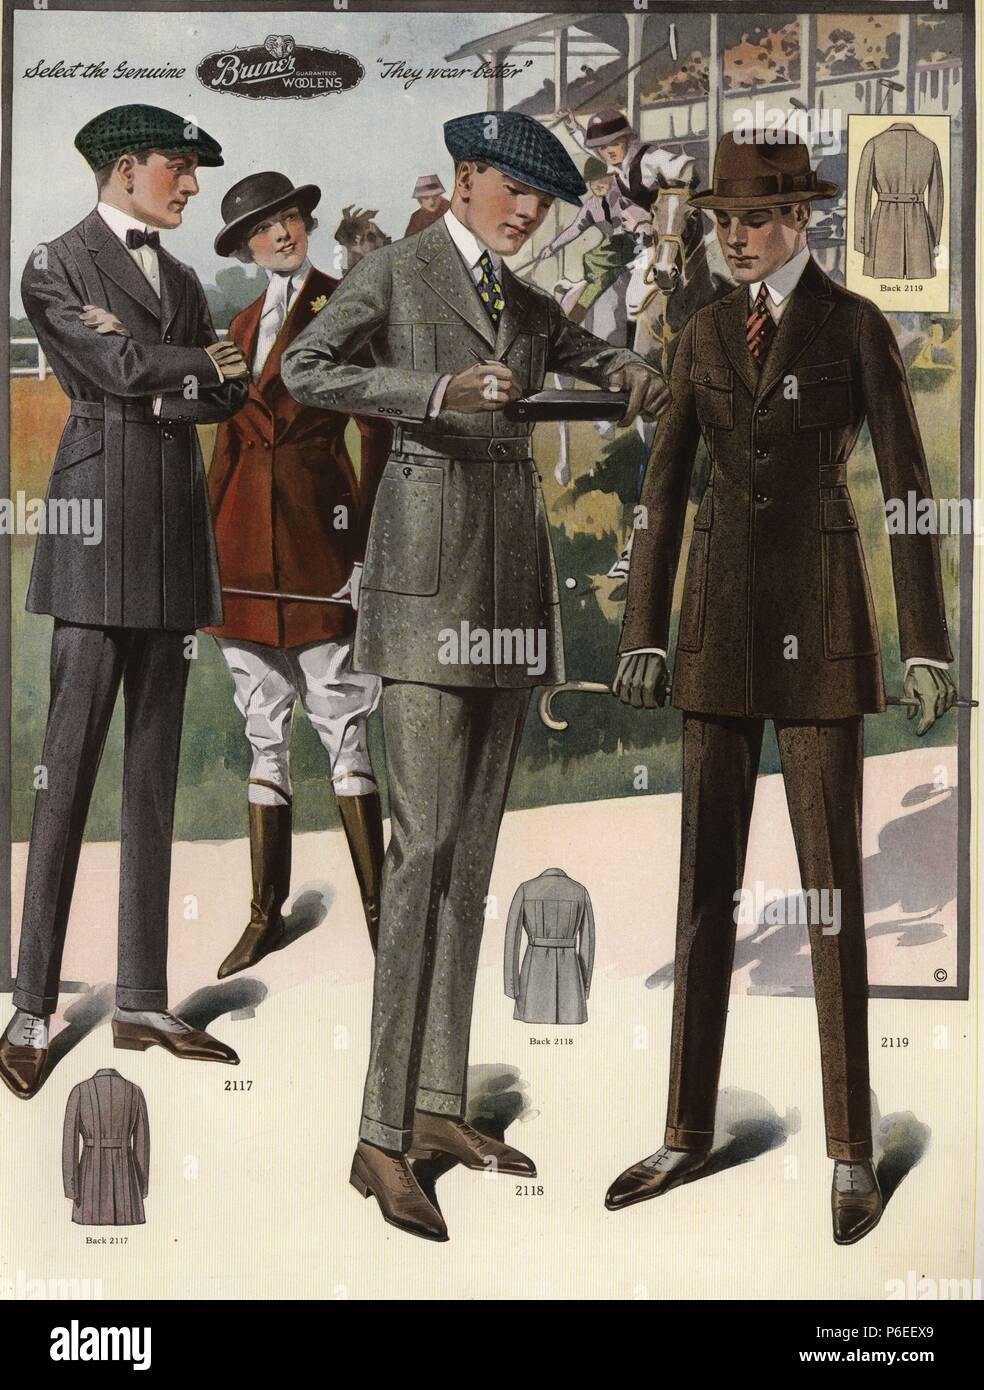 Men's single-breasted suits in sack, men in spats and cloth caps. Scene ...